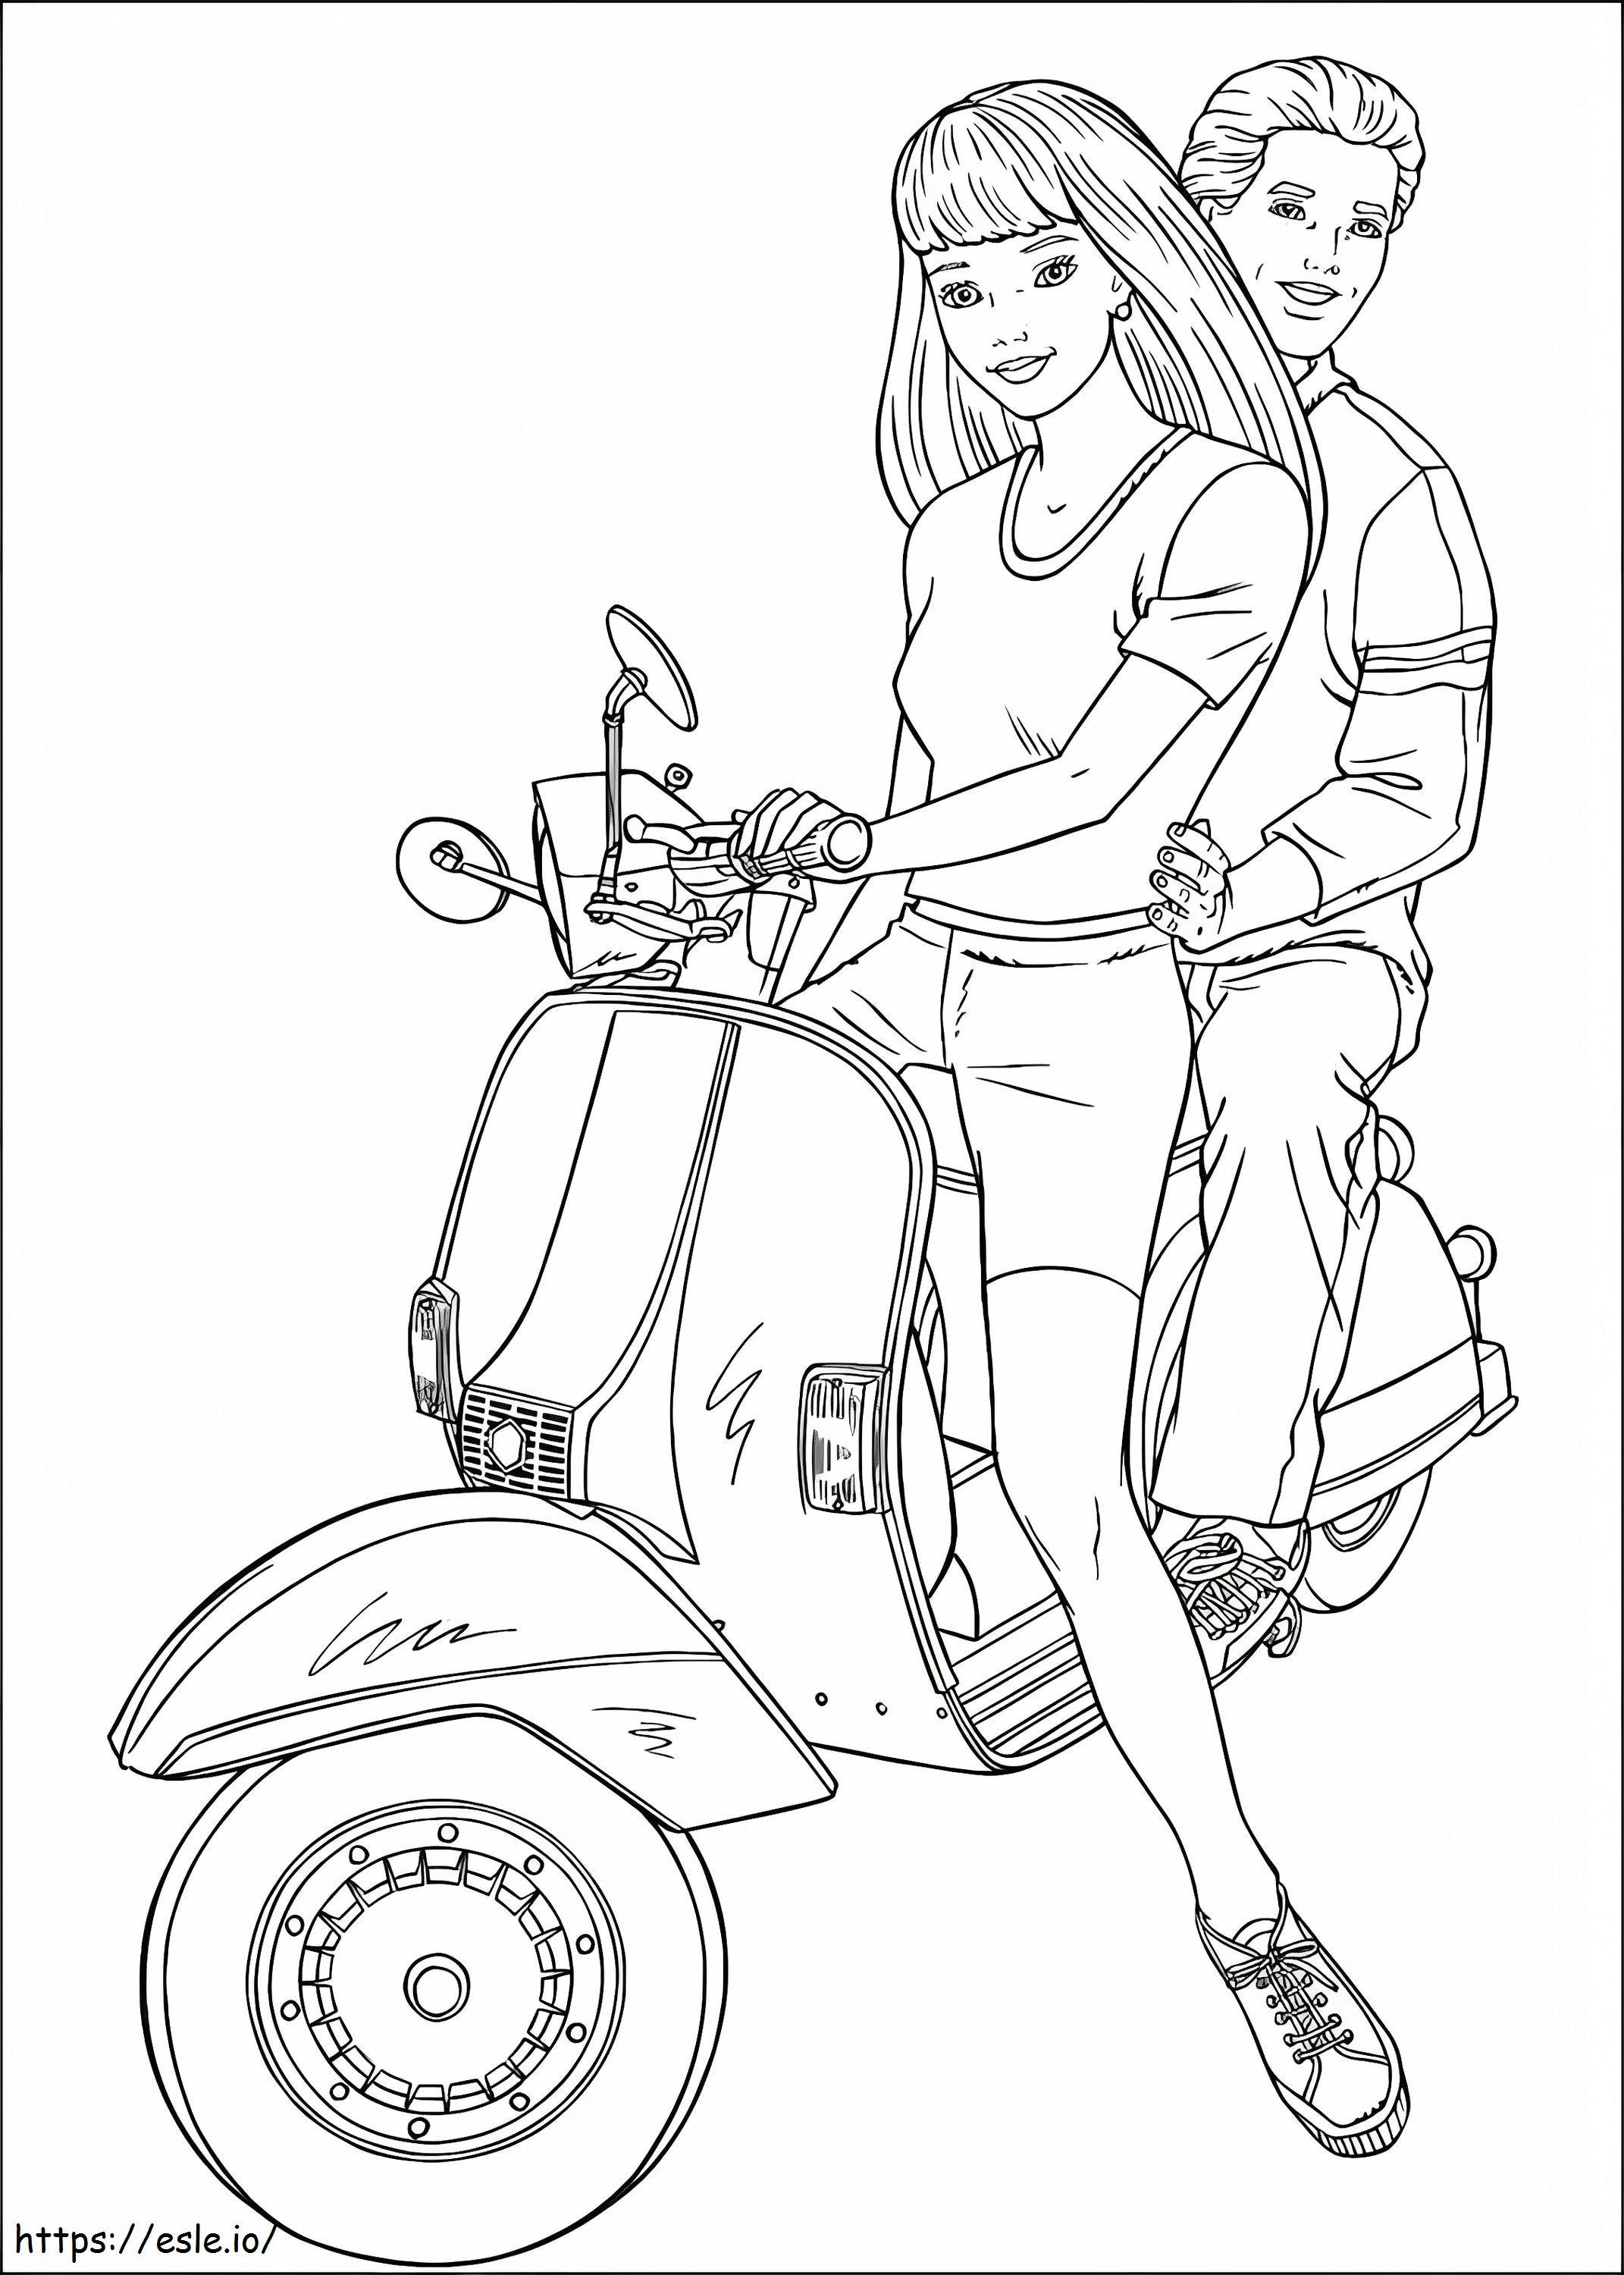 1533783857 Barbie With Her Boy Friend A4 coloring page